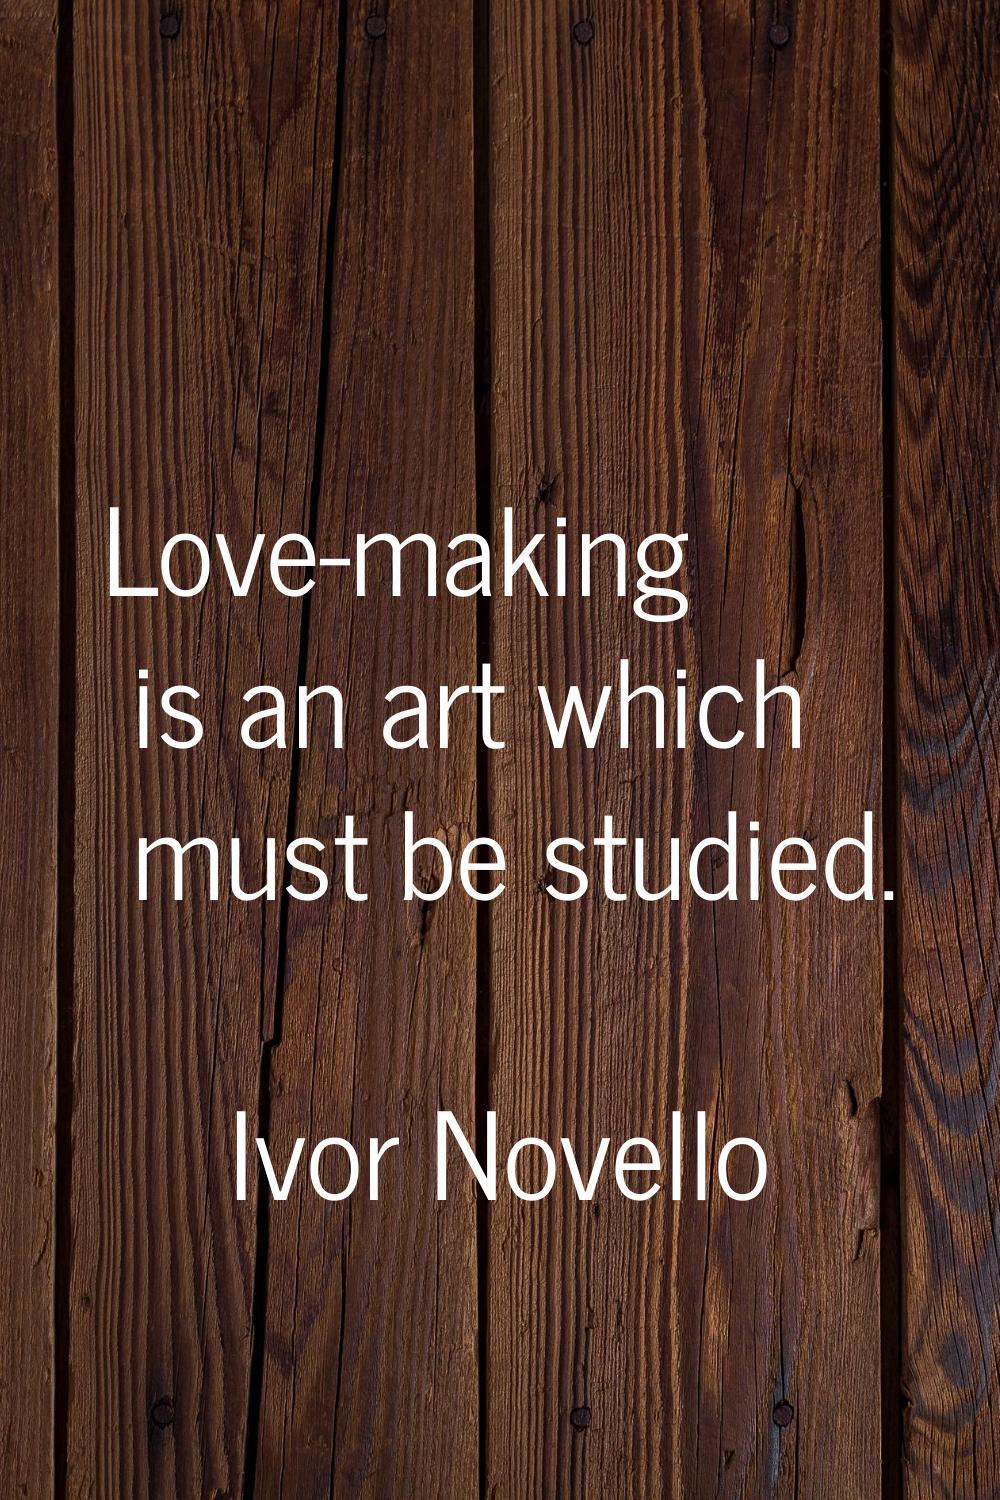 Love-making is an art which must be studied.